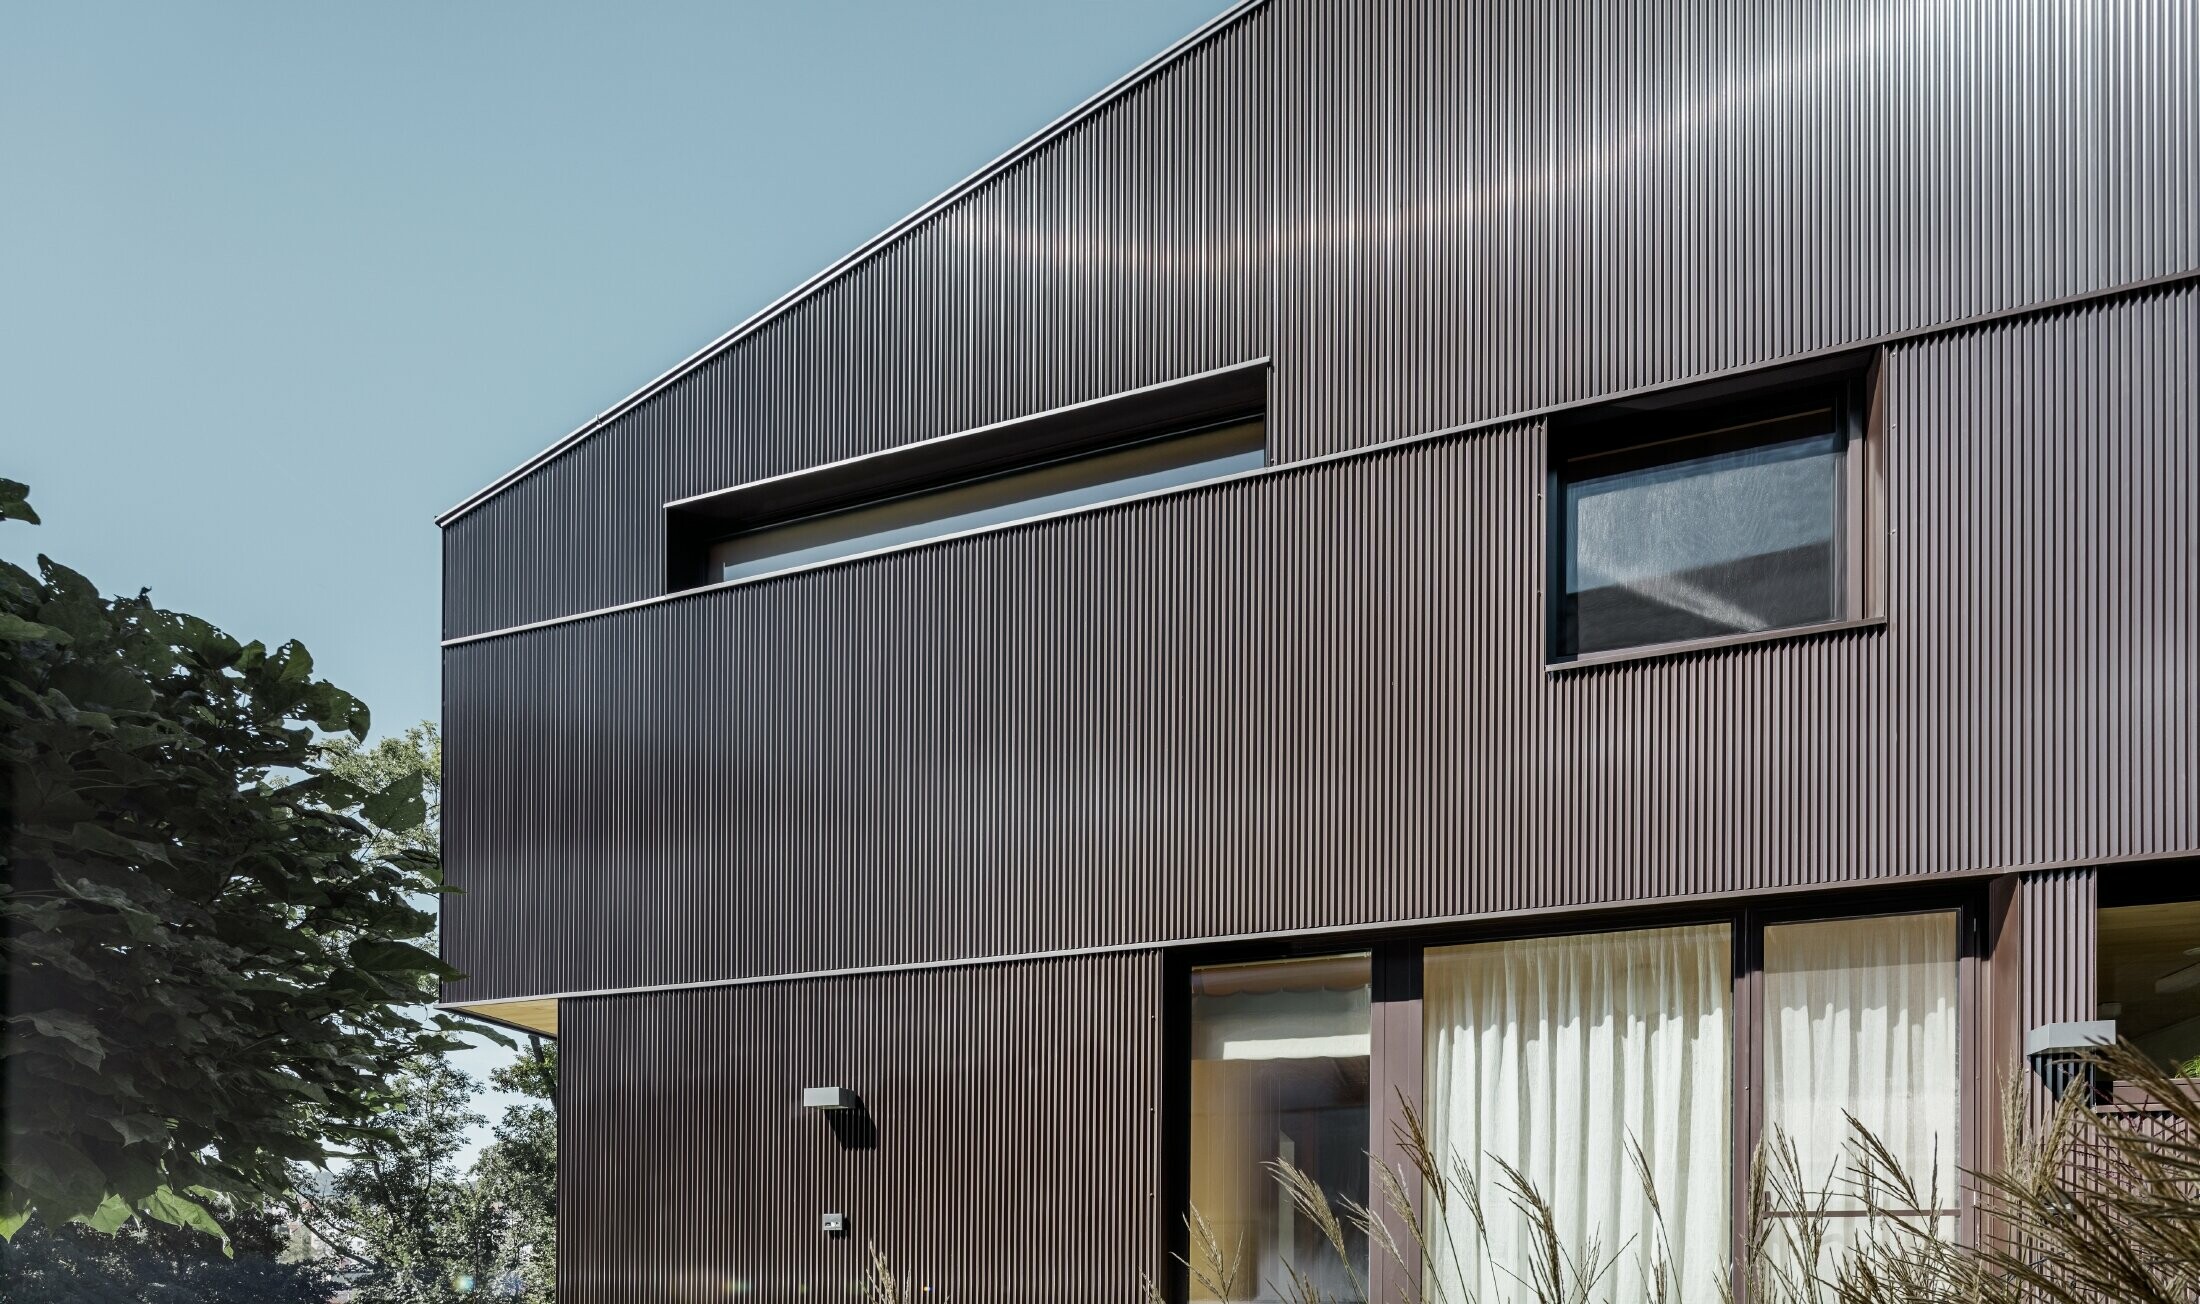 Modern detached house with PREFA zig-zag profile façade cladding in brown.